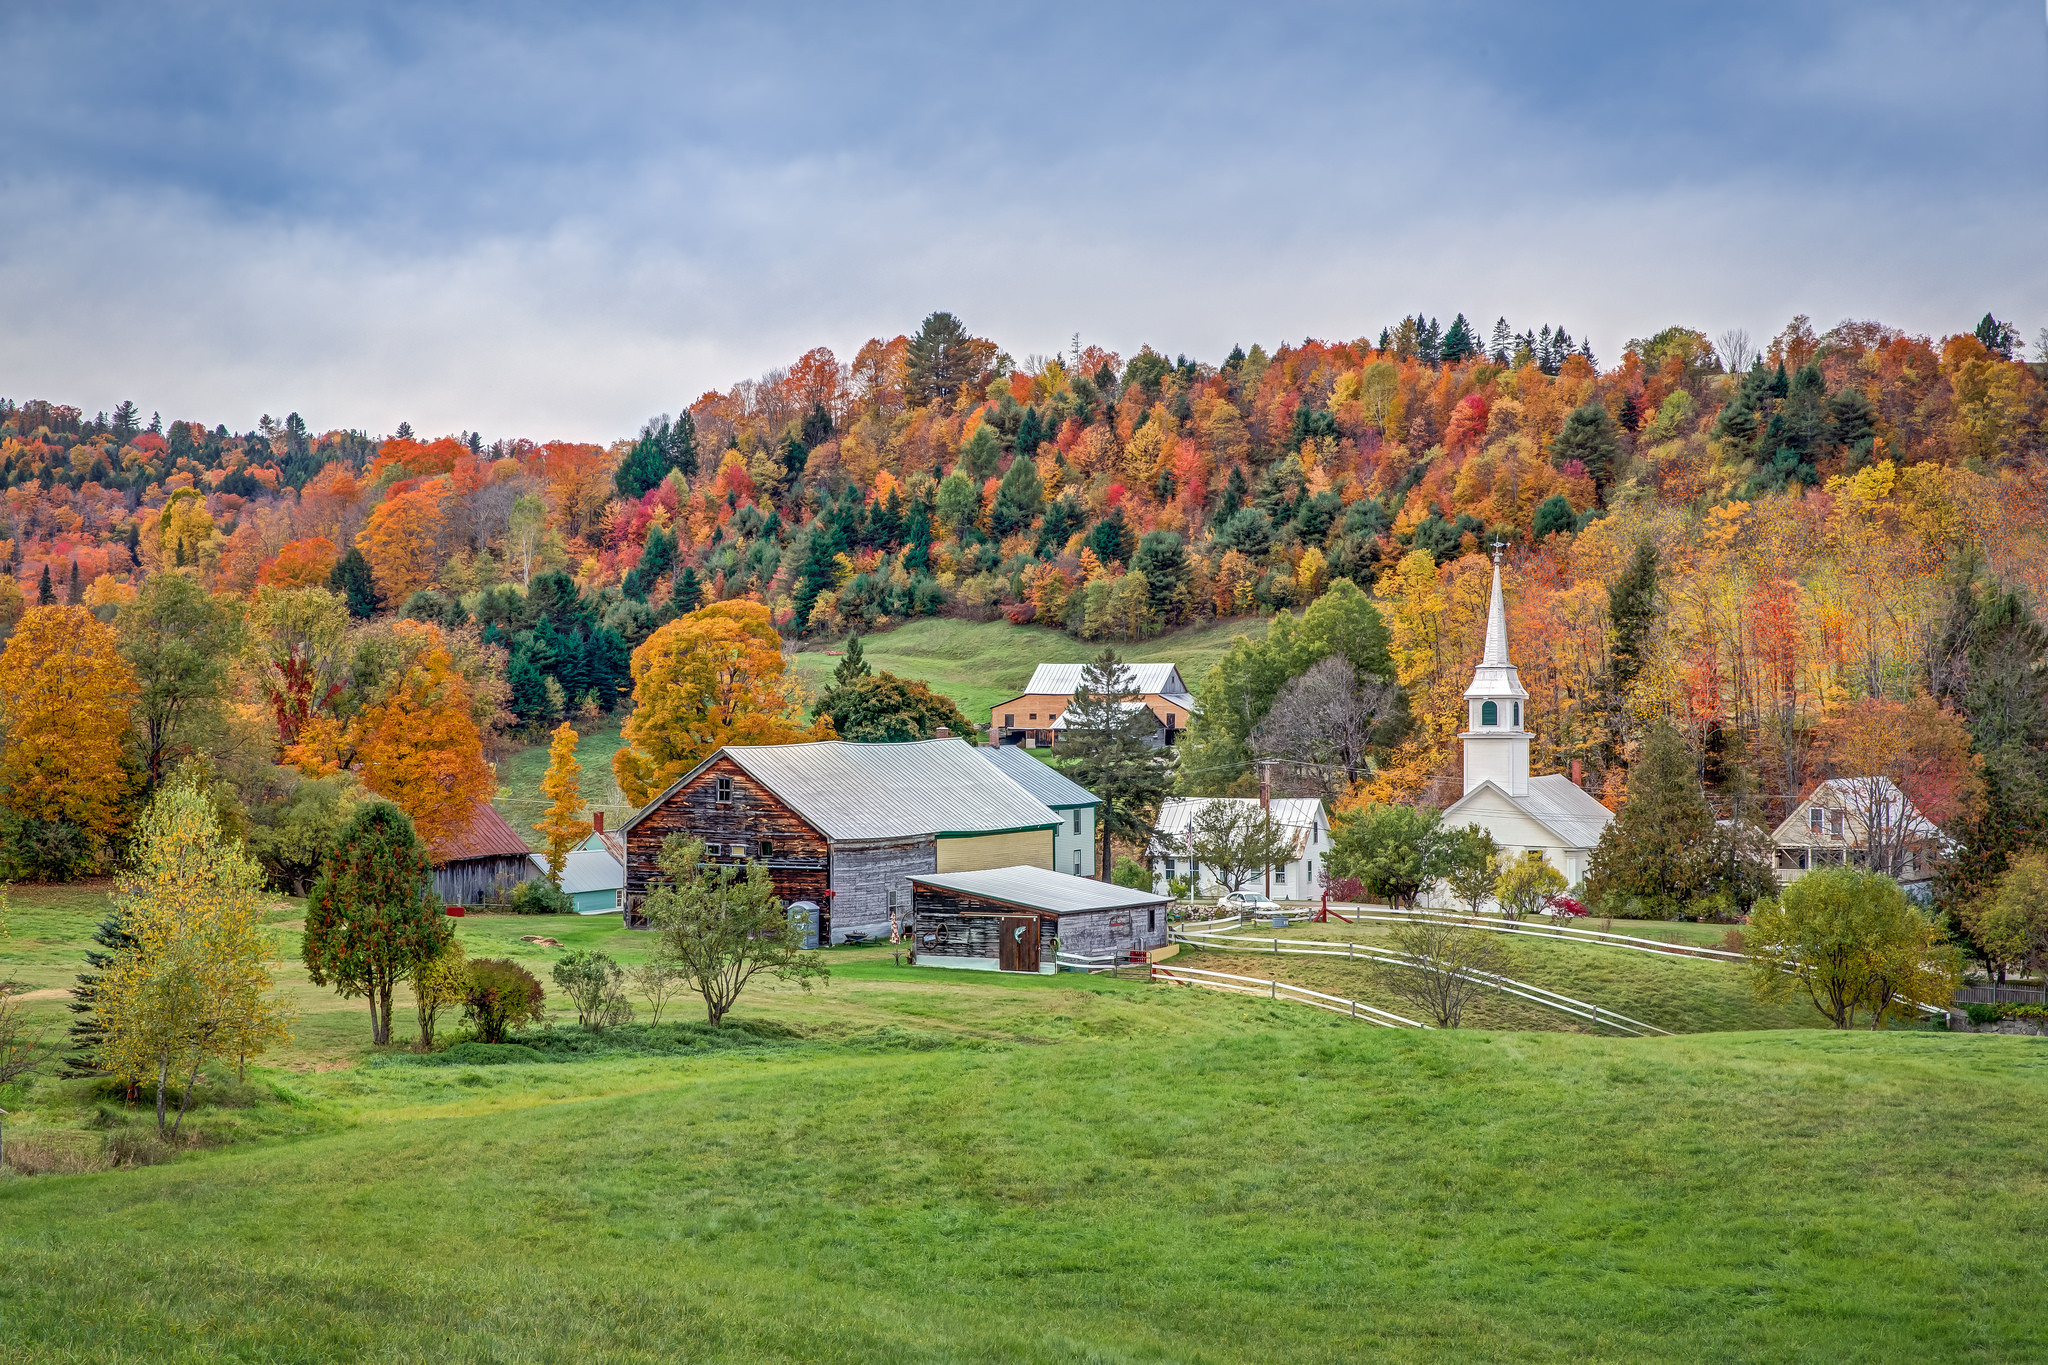 Photo New England Vermont fields houses - free pictures on Fonwall.